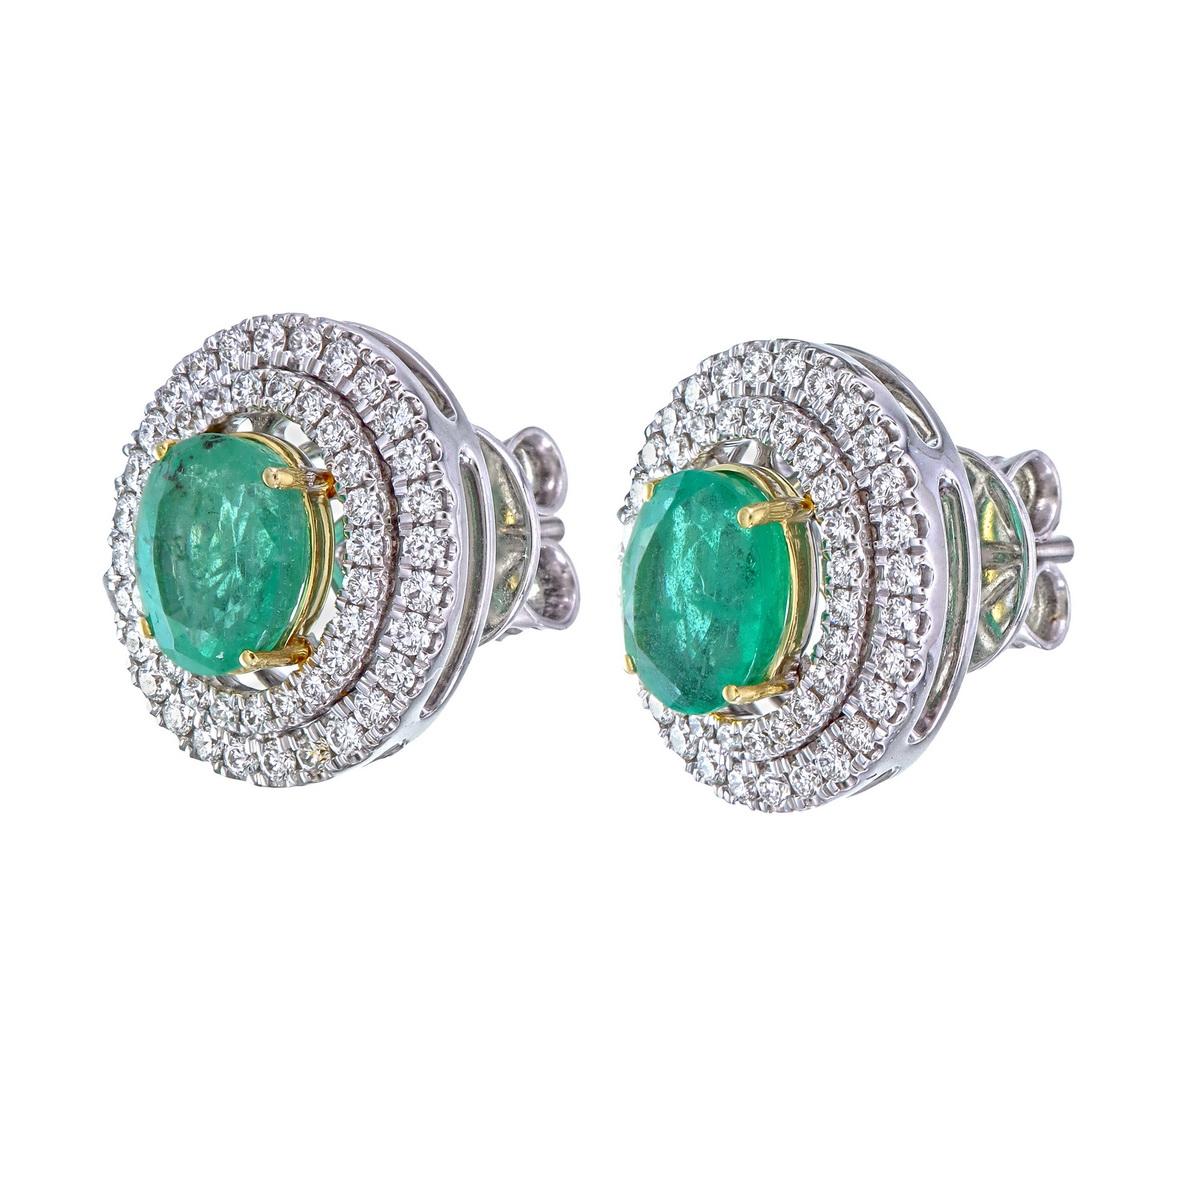 Earrings made in 18kt White gold
Natural emeralds 8x6 mm weighing 2.10 cts
Round diamonds 0.66 cts
Push back mechanism

